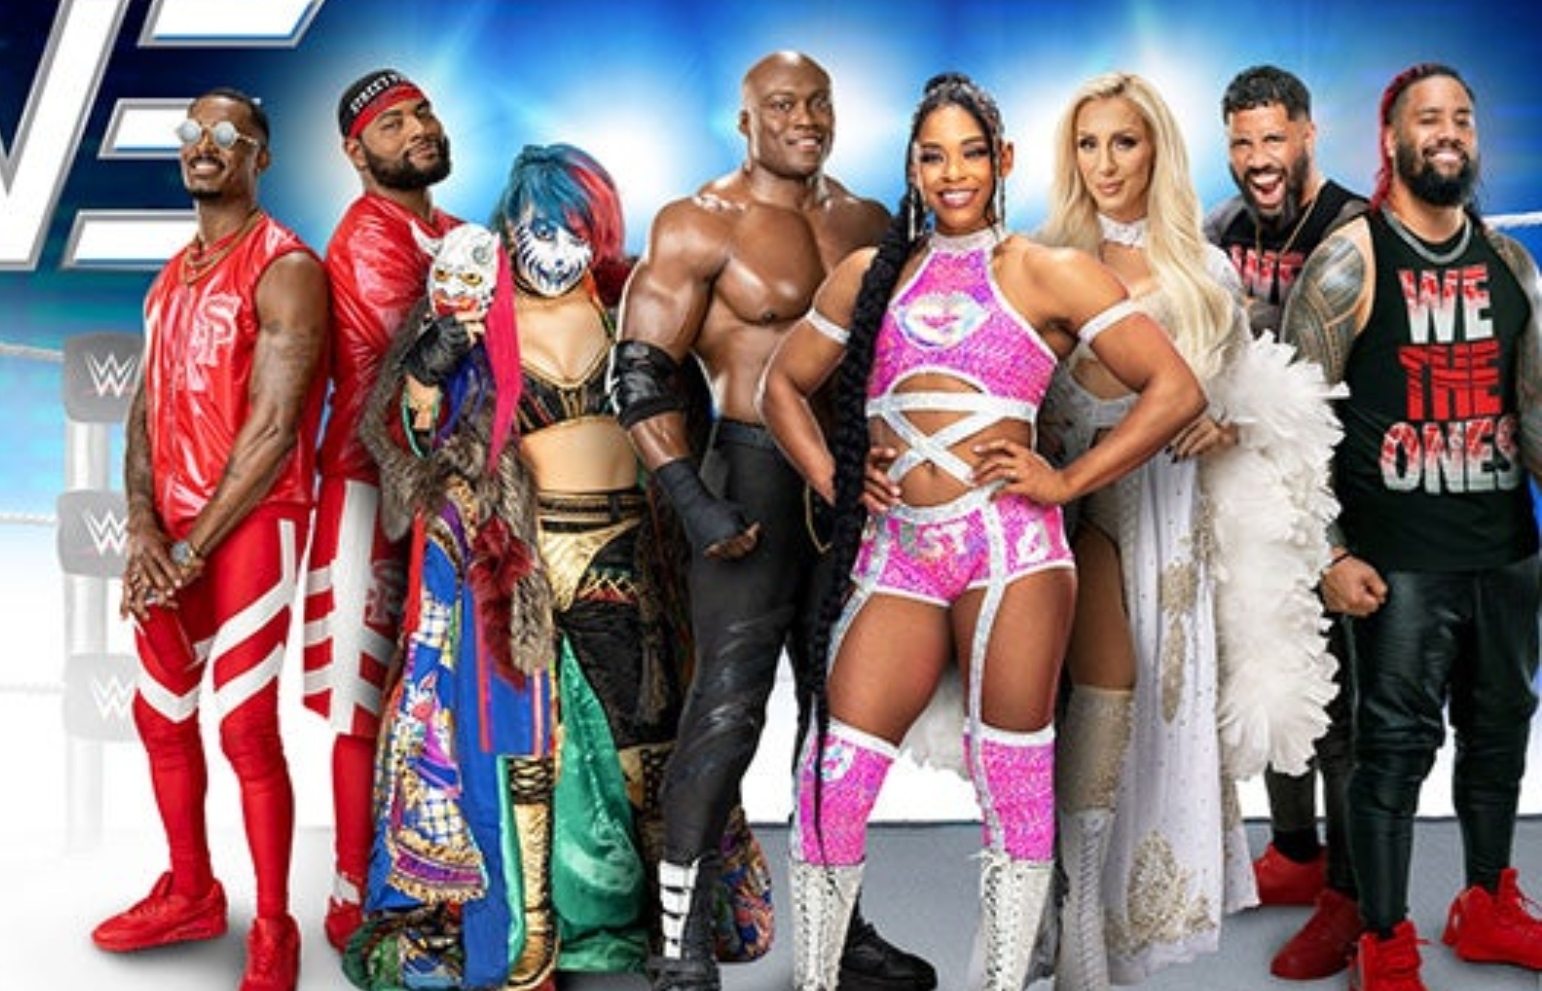 Fans can expect to see The Usos, Charlotte Flair, Bianca Belair, Bobby Lashley, Asuka, The Street Profits and many more.